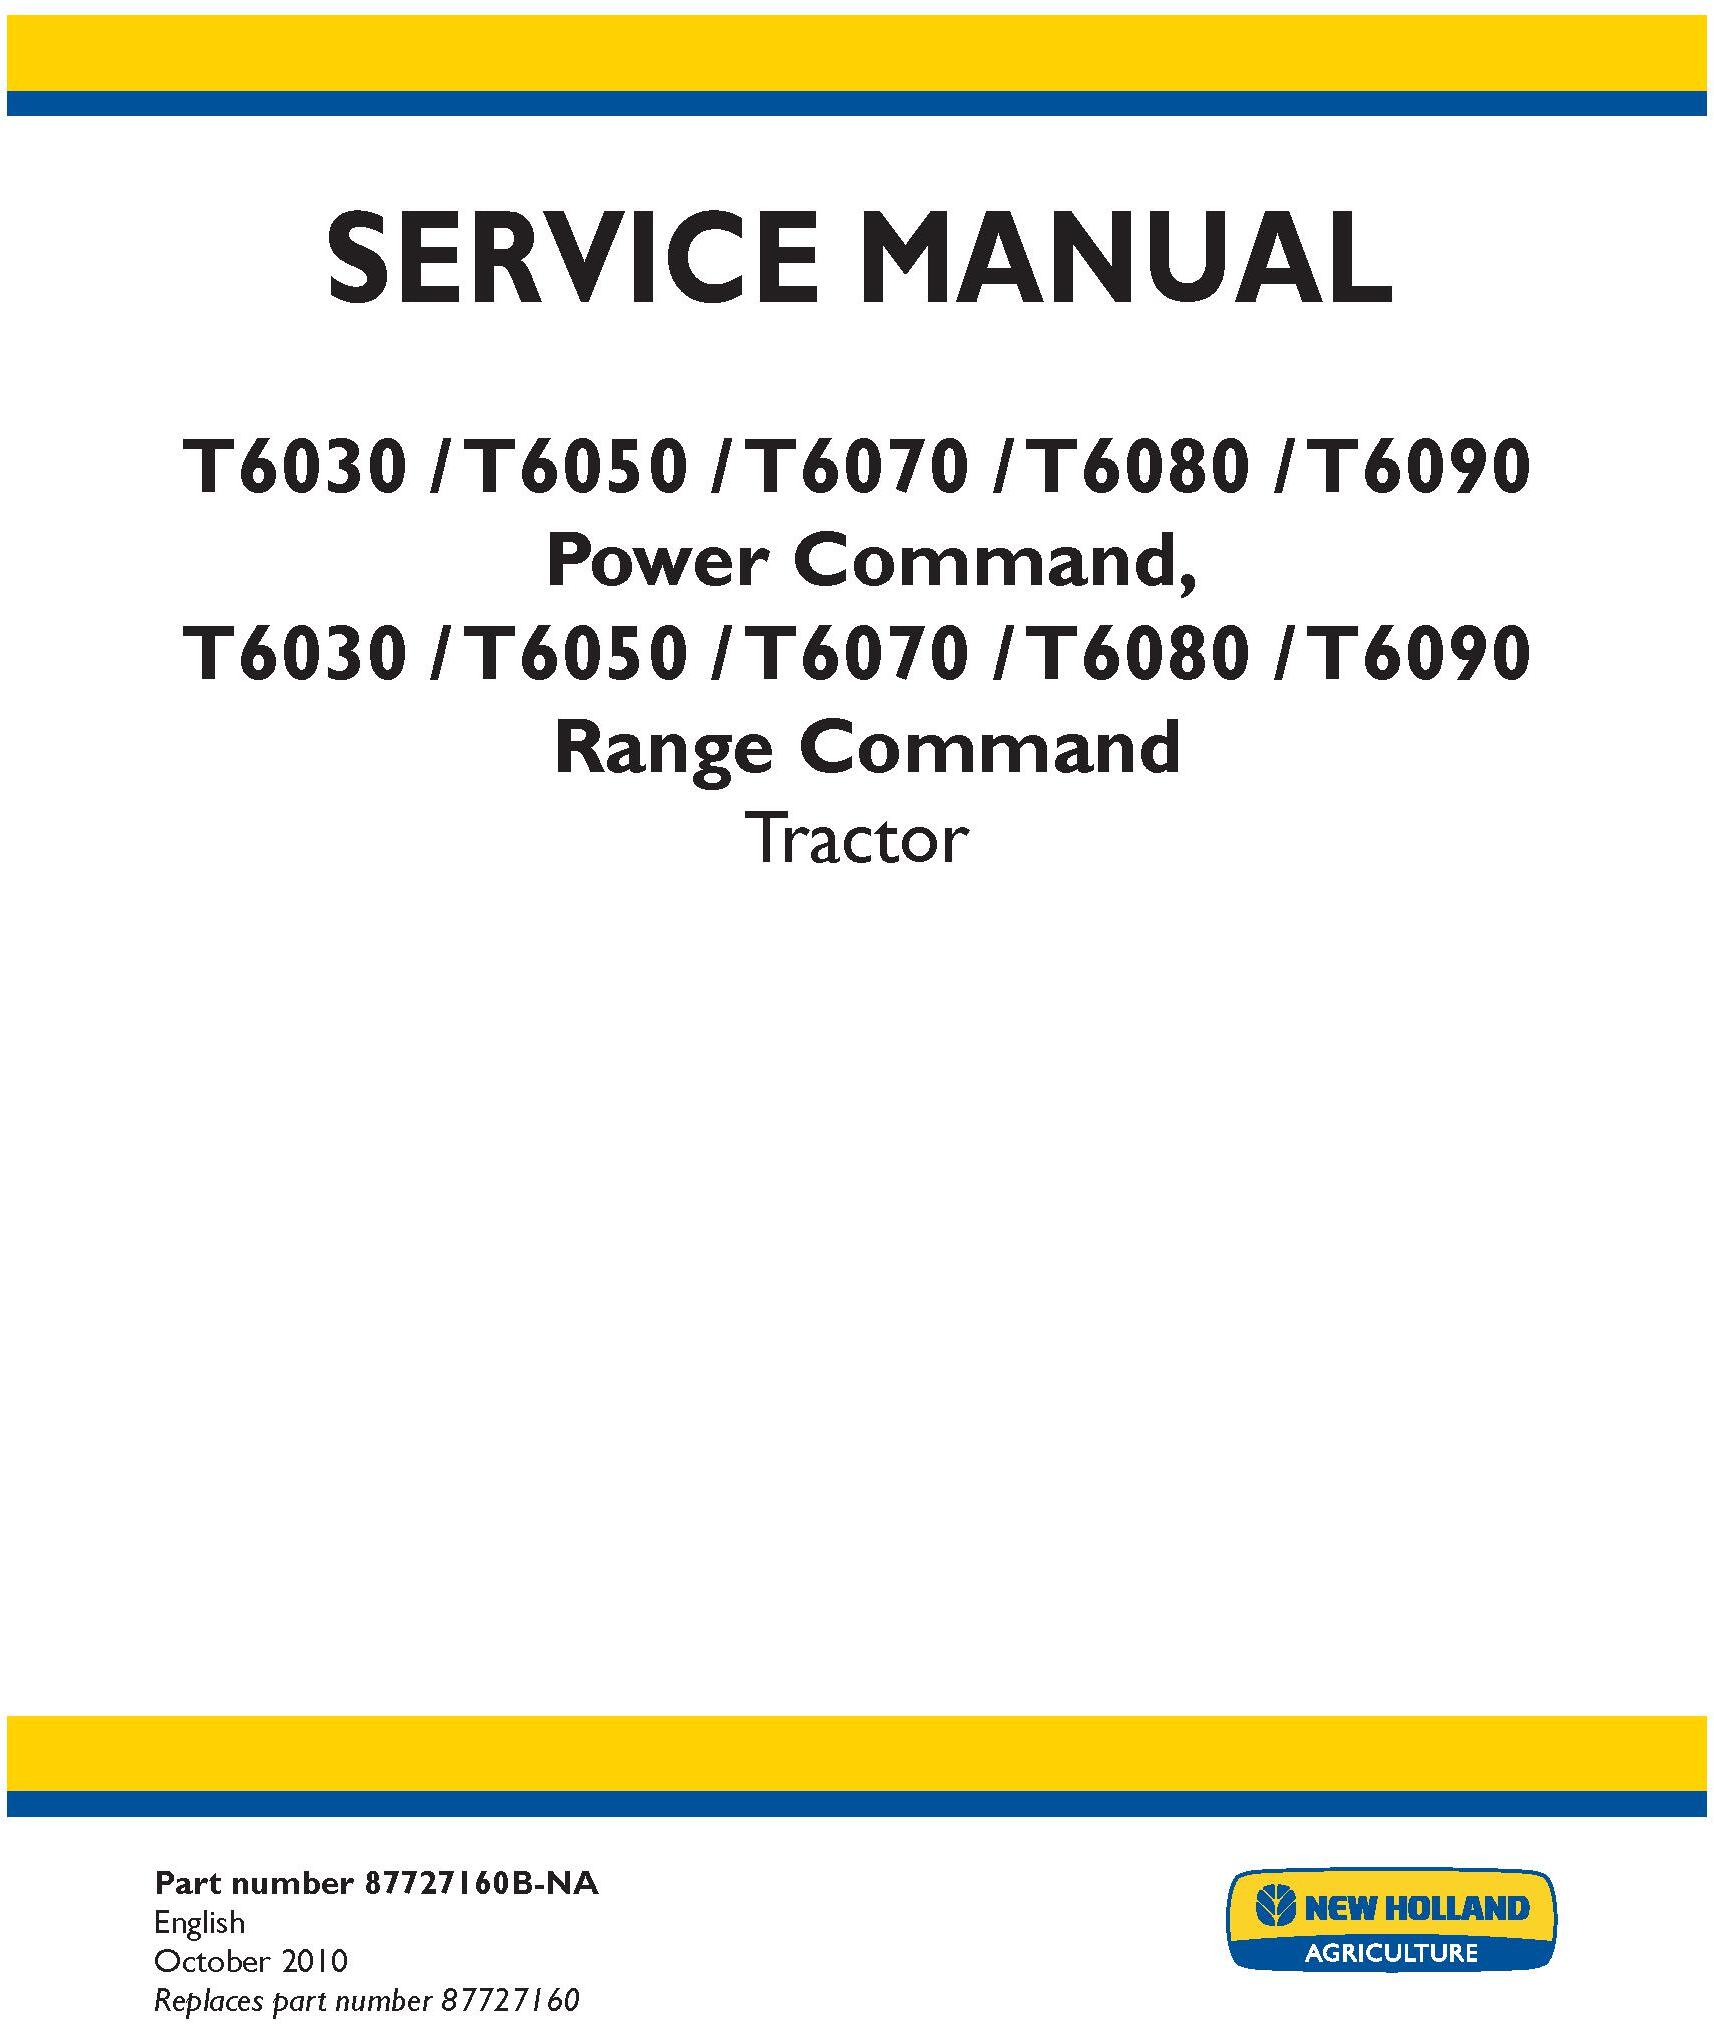 New Holland T6030, T6050, T6070, T6080, T6090 Power Command, Range Command Service Manual - 19635